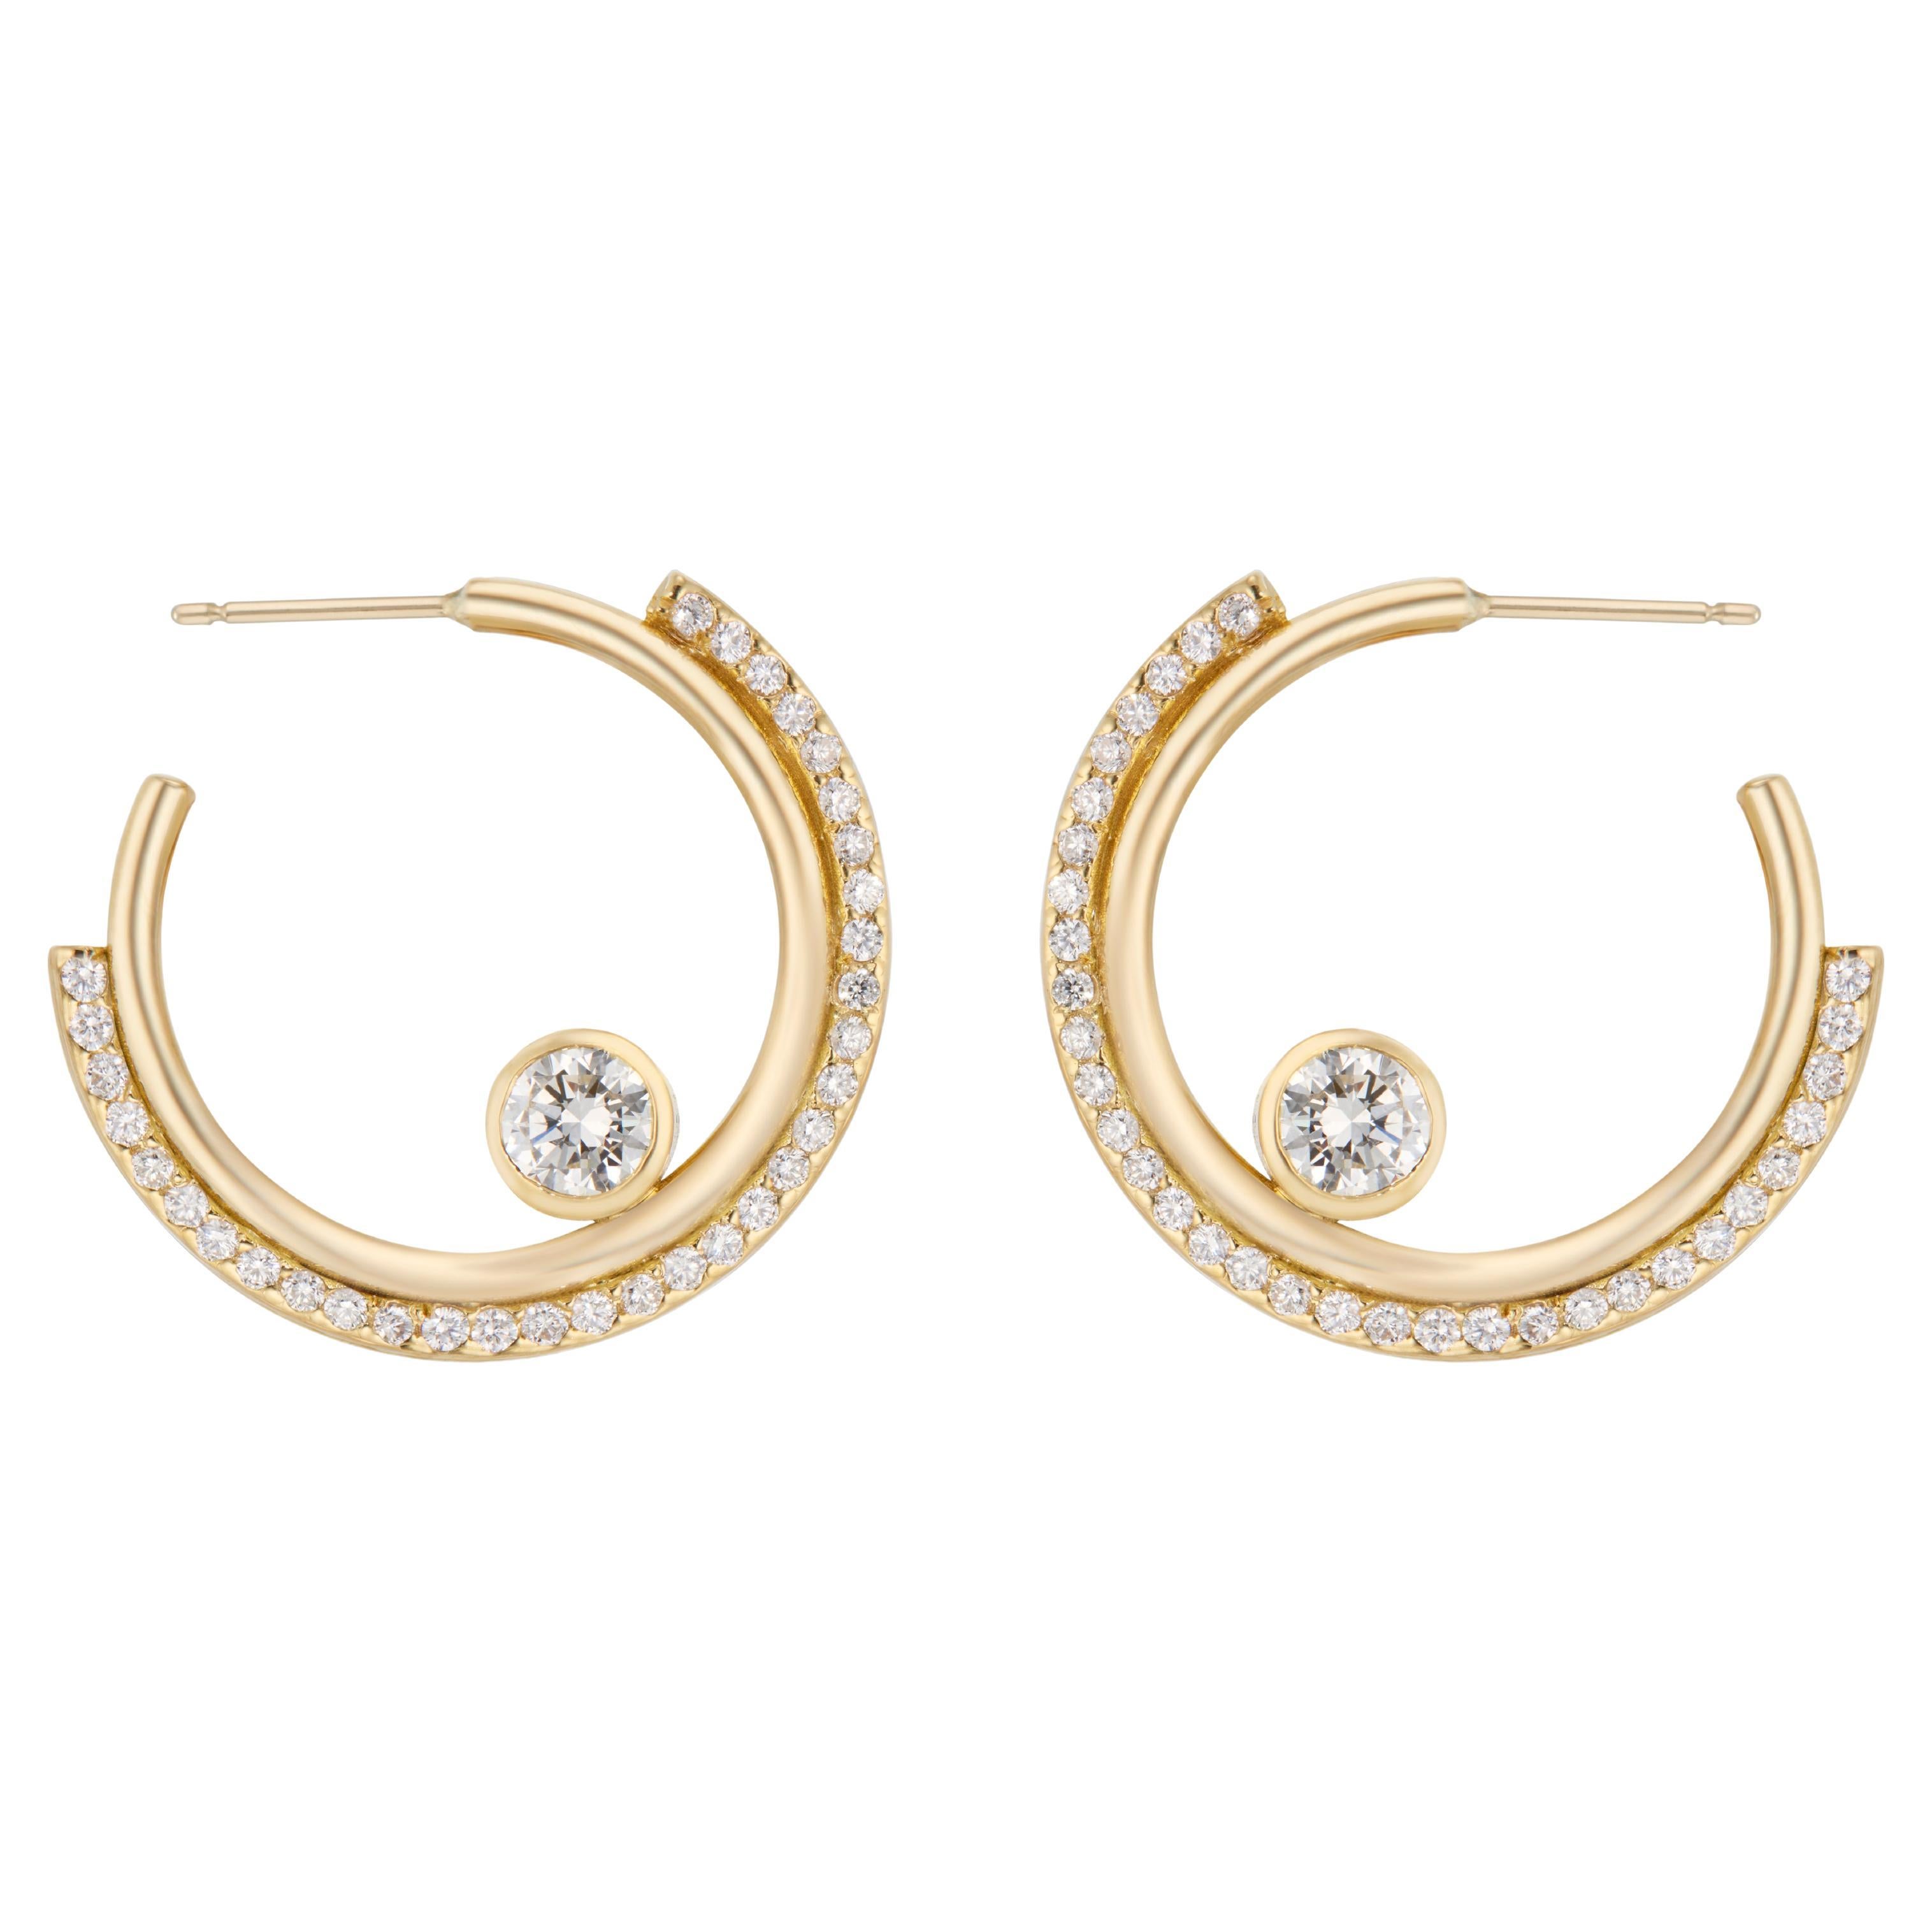 Casey Perez 18K Gold Arc Hoops with ribbed detail and 1.83 carats of Diamonds For Sale